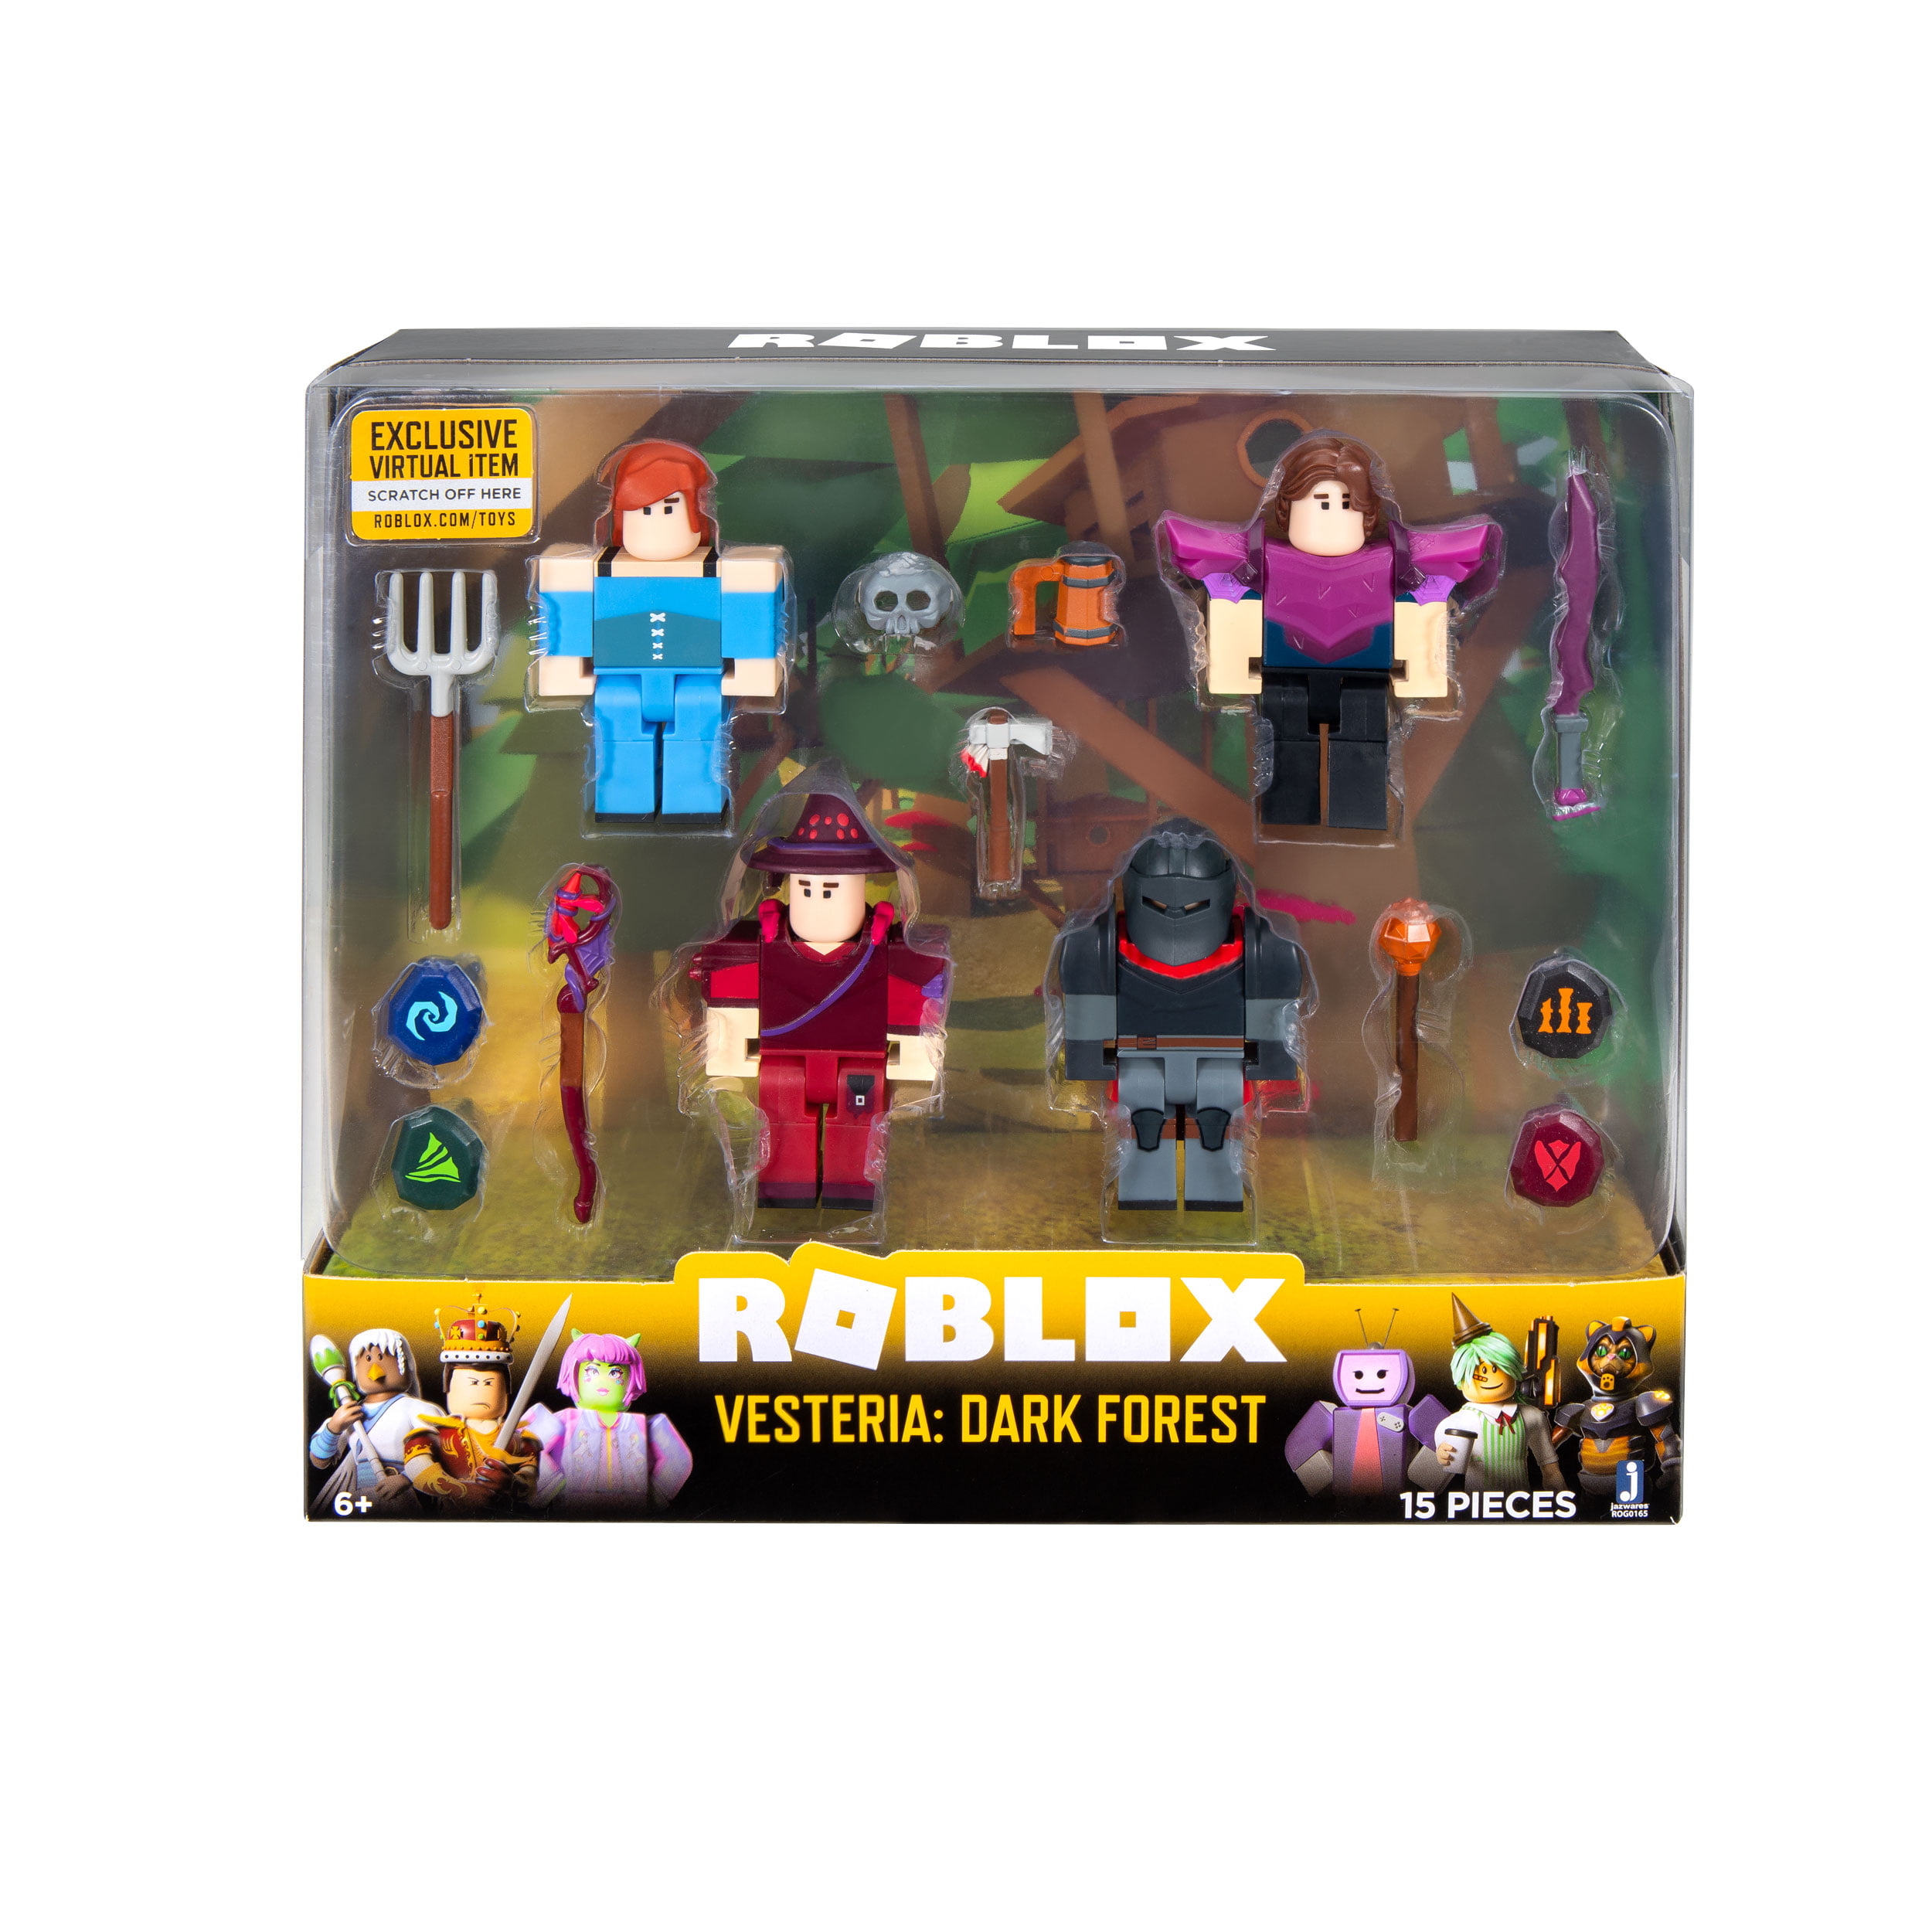 Roblox Celebrity Collection Vesteria Dark Forest Four Figure Pack Includes Exclusive Virtual Item Walmart Com Walmart Com - roblox how to play vesteria free